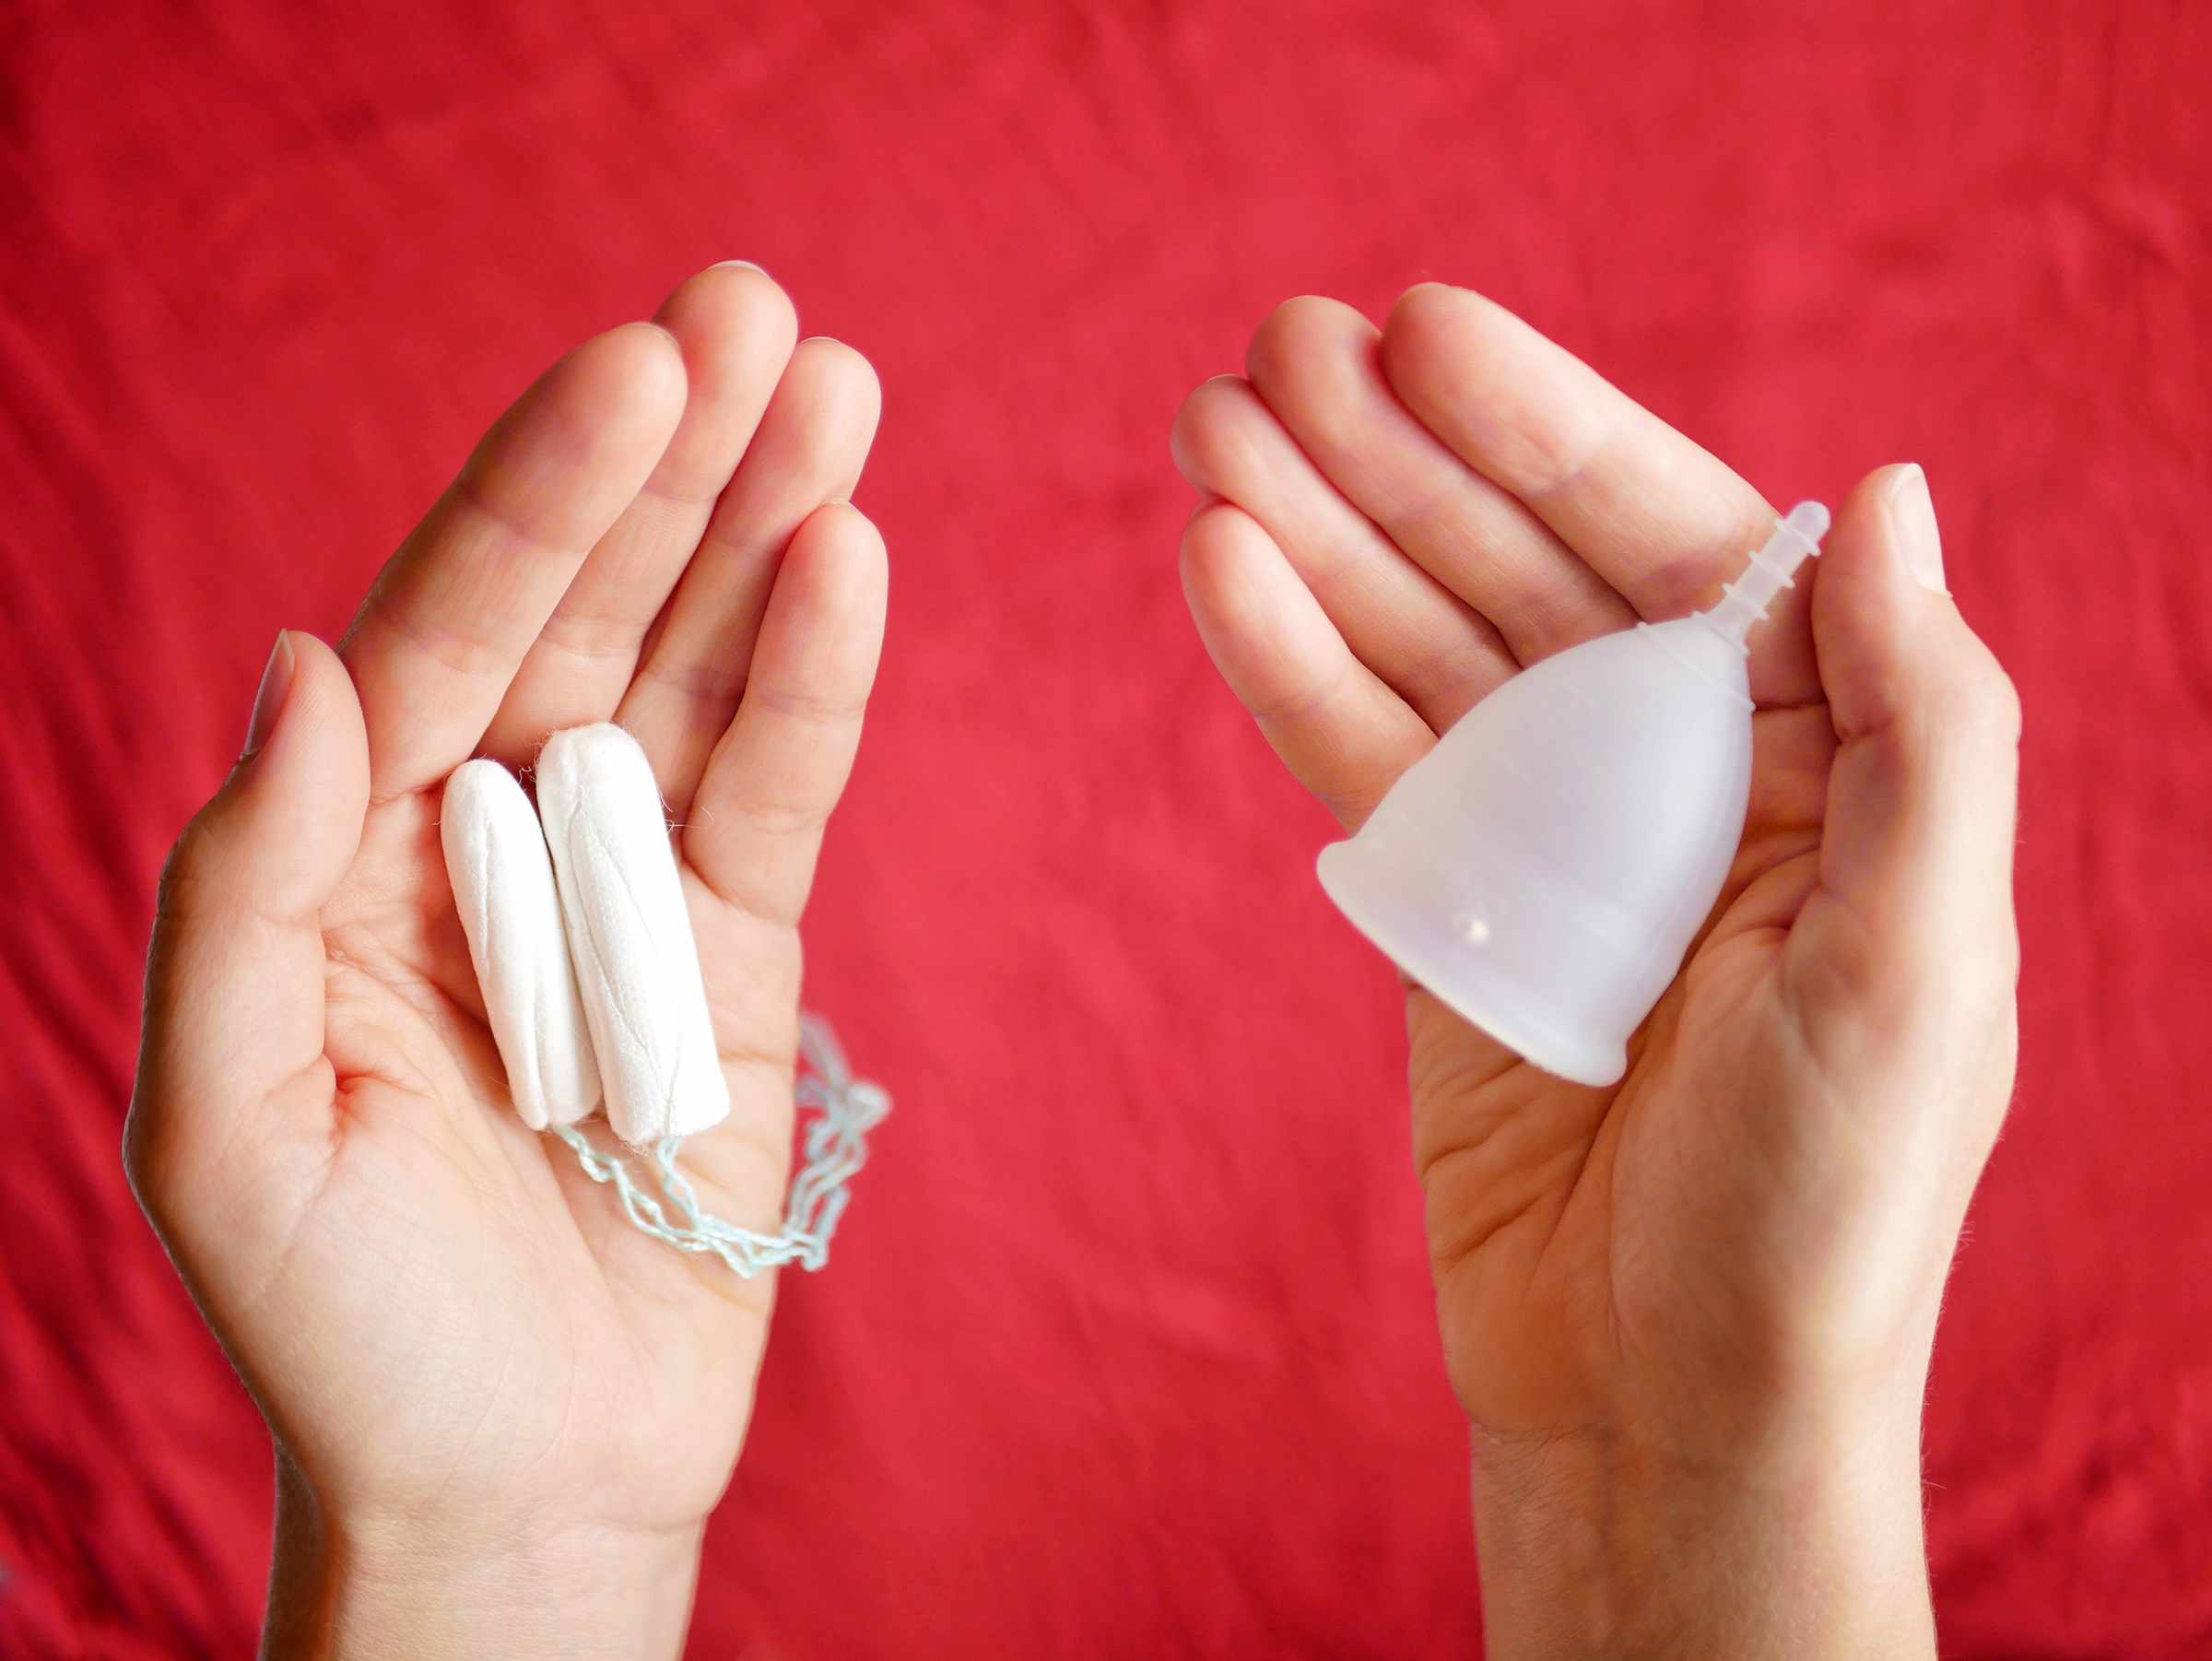 Photo of two hands palm up with a red backdrop, one with two tampons in, the other a menstrual cup in. Photo by Vulvani - www.vulvani.com